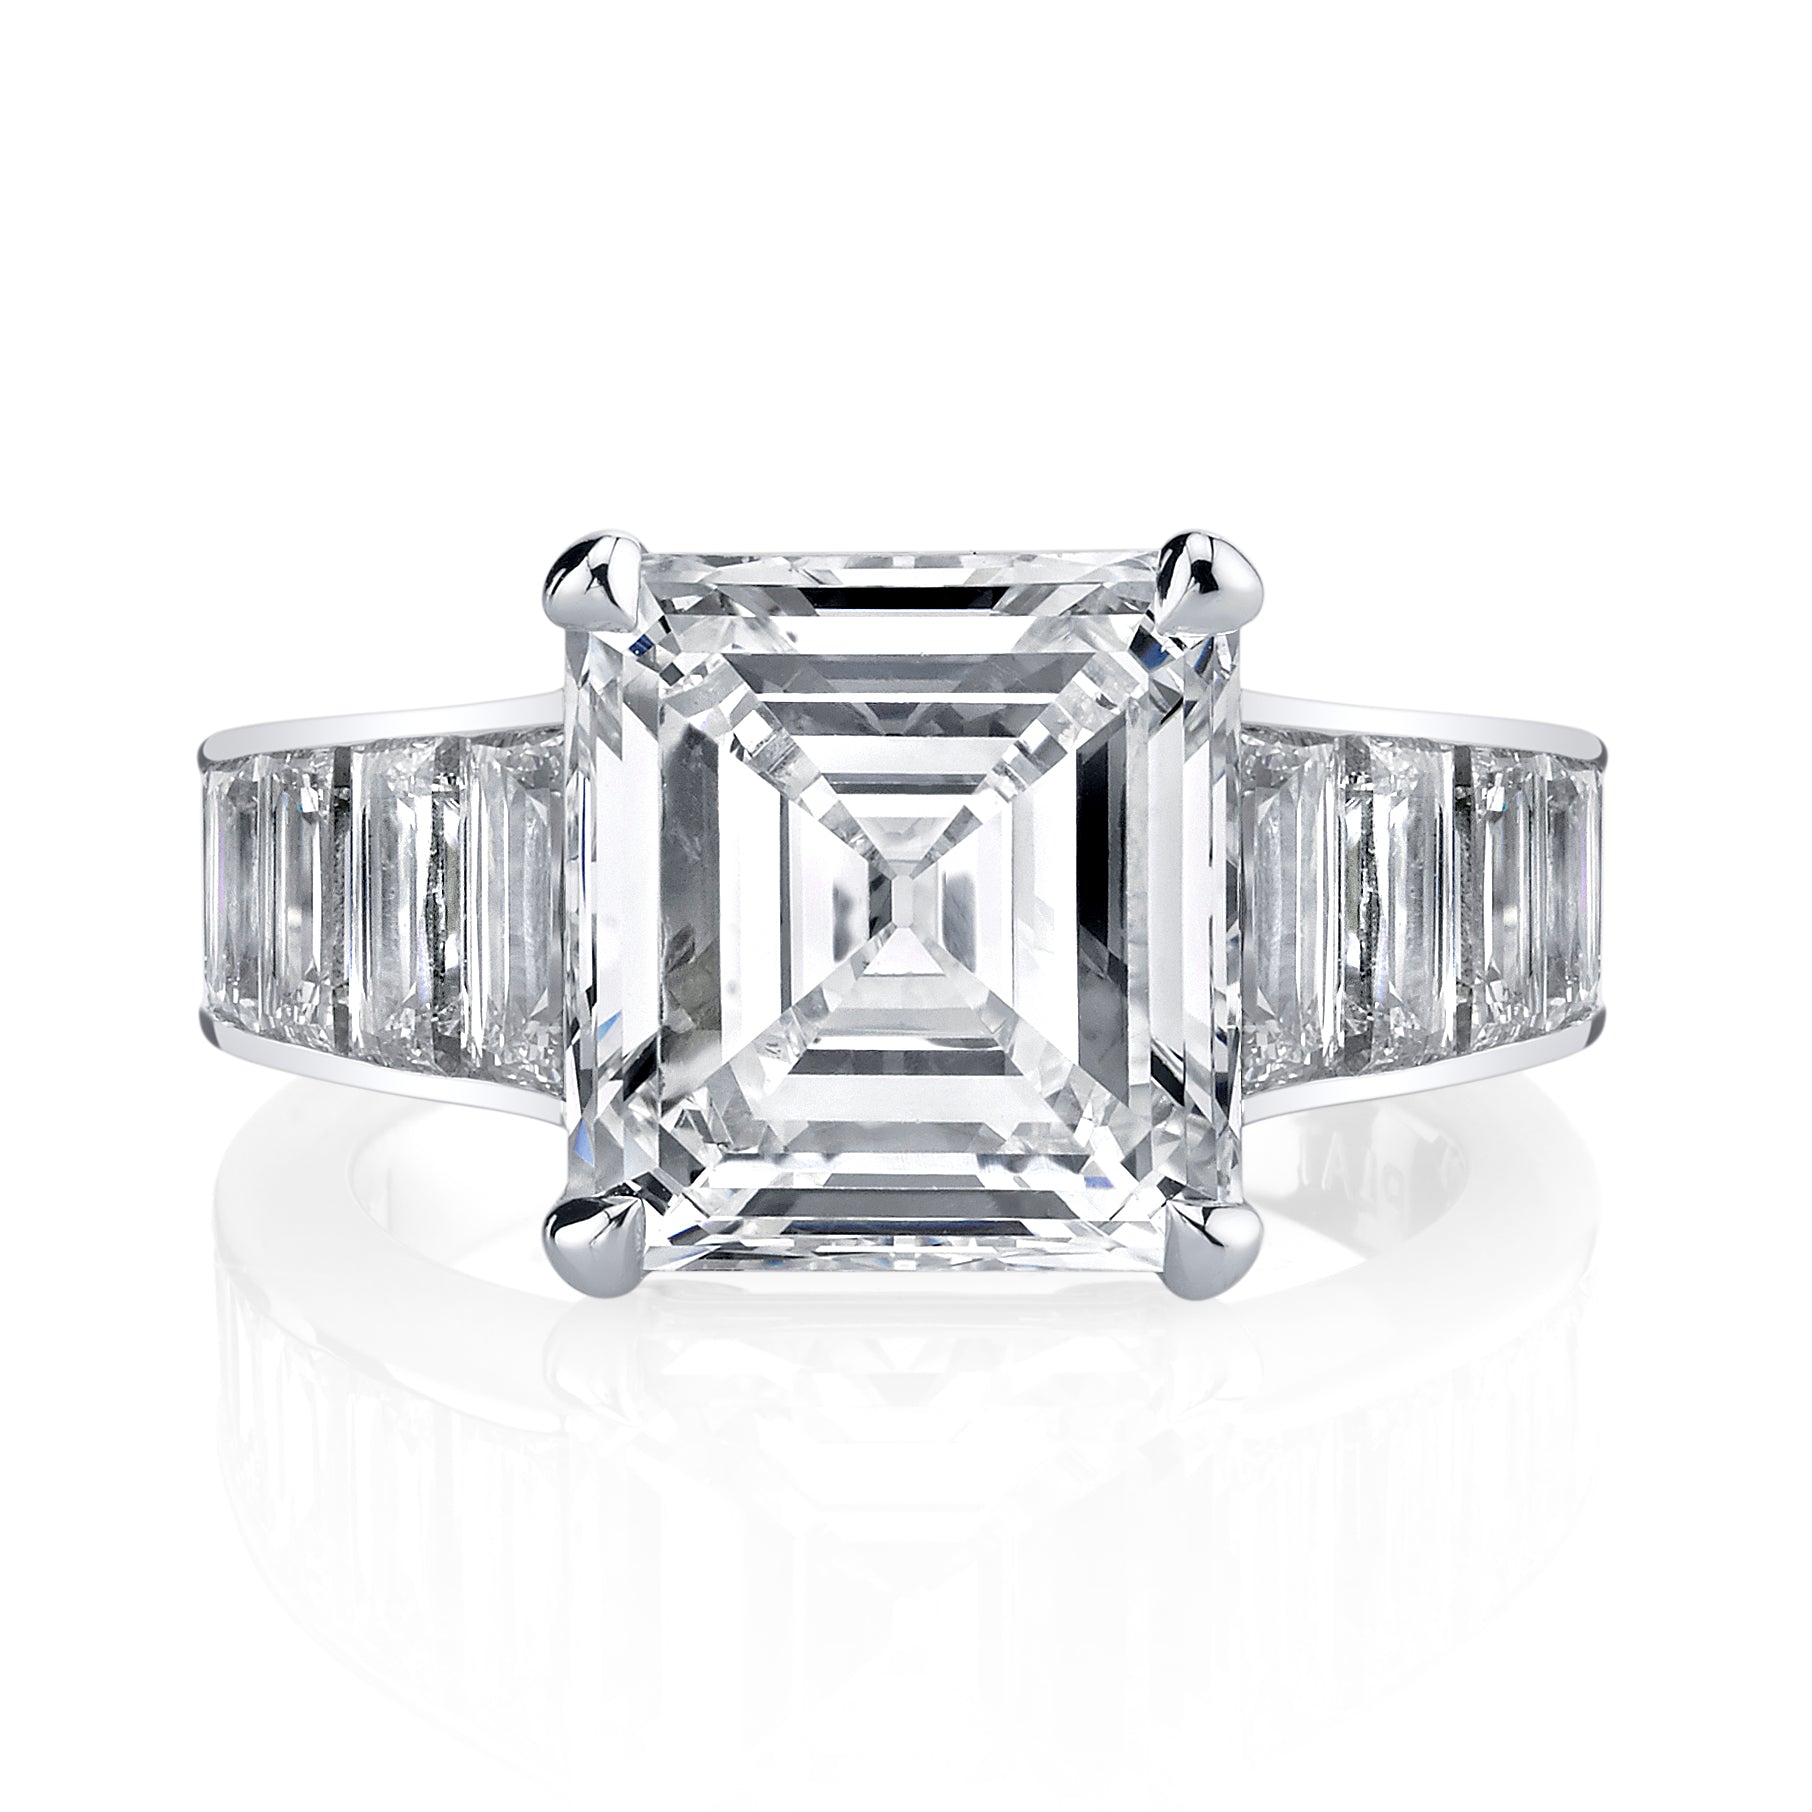 Why we love Emerald Cut Diamond Engagement Rings NZ | Four Words